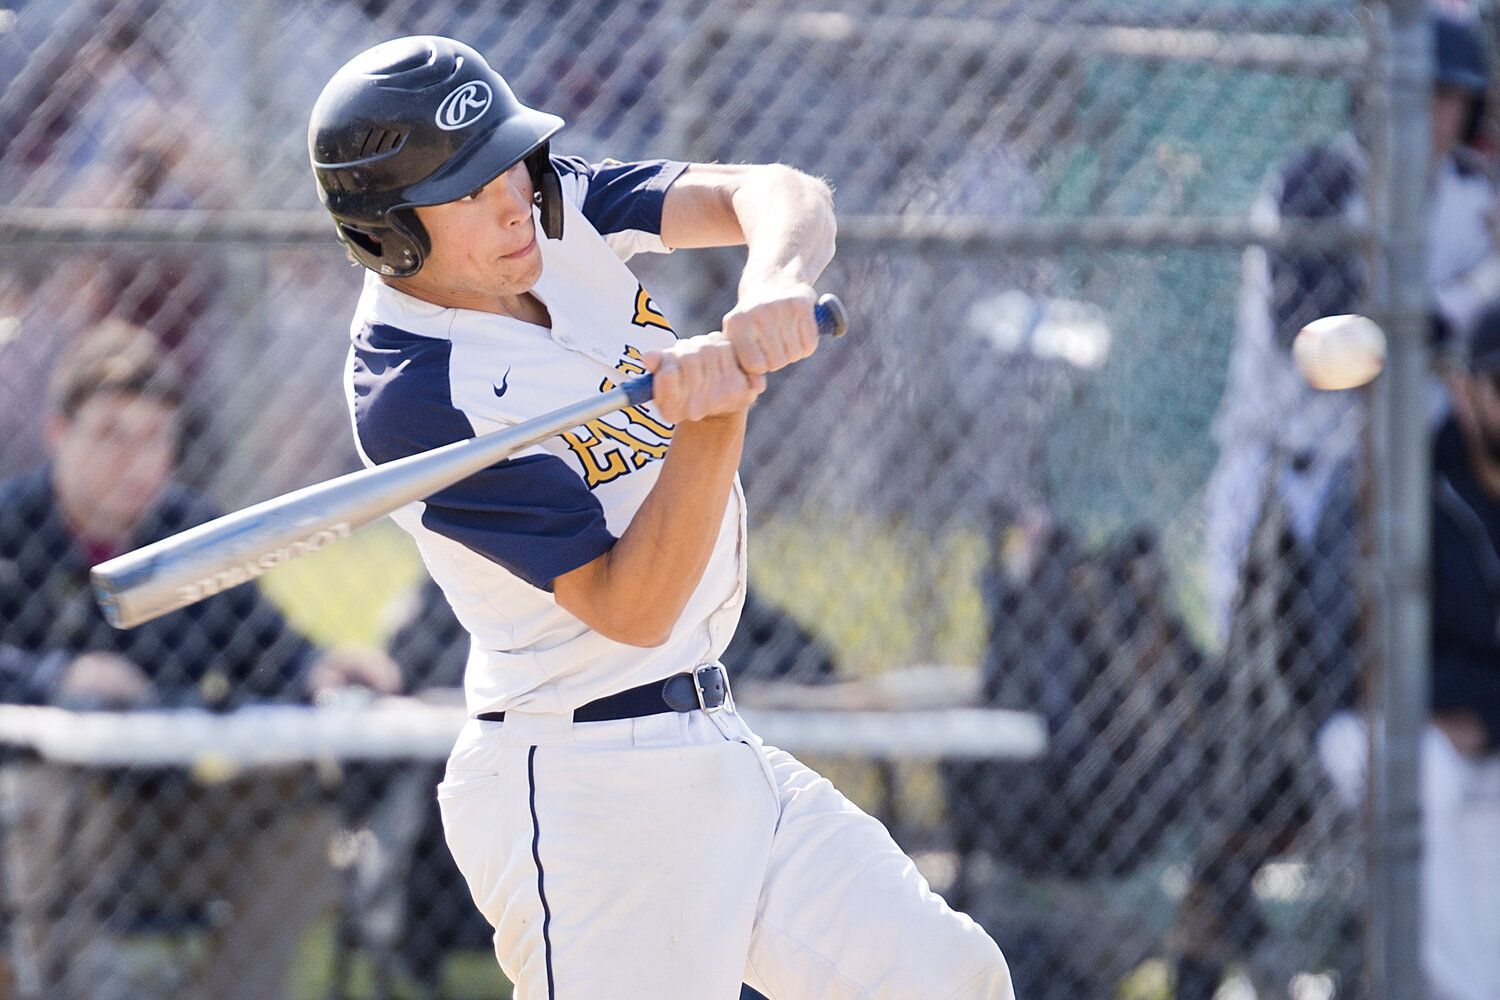 Eli Terrell makes contact while at bat against Mount St. Charles, Thursday.